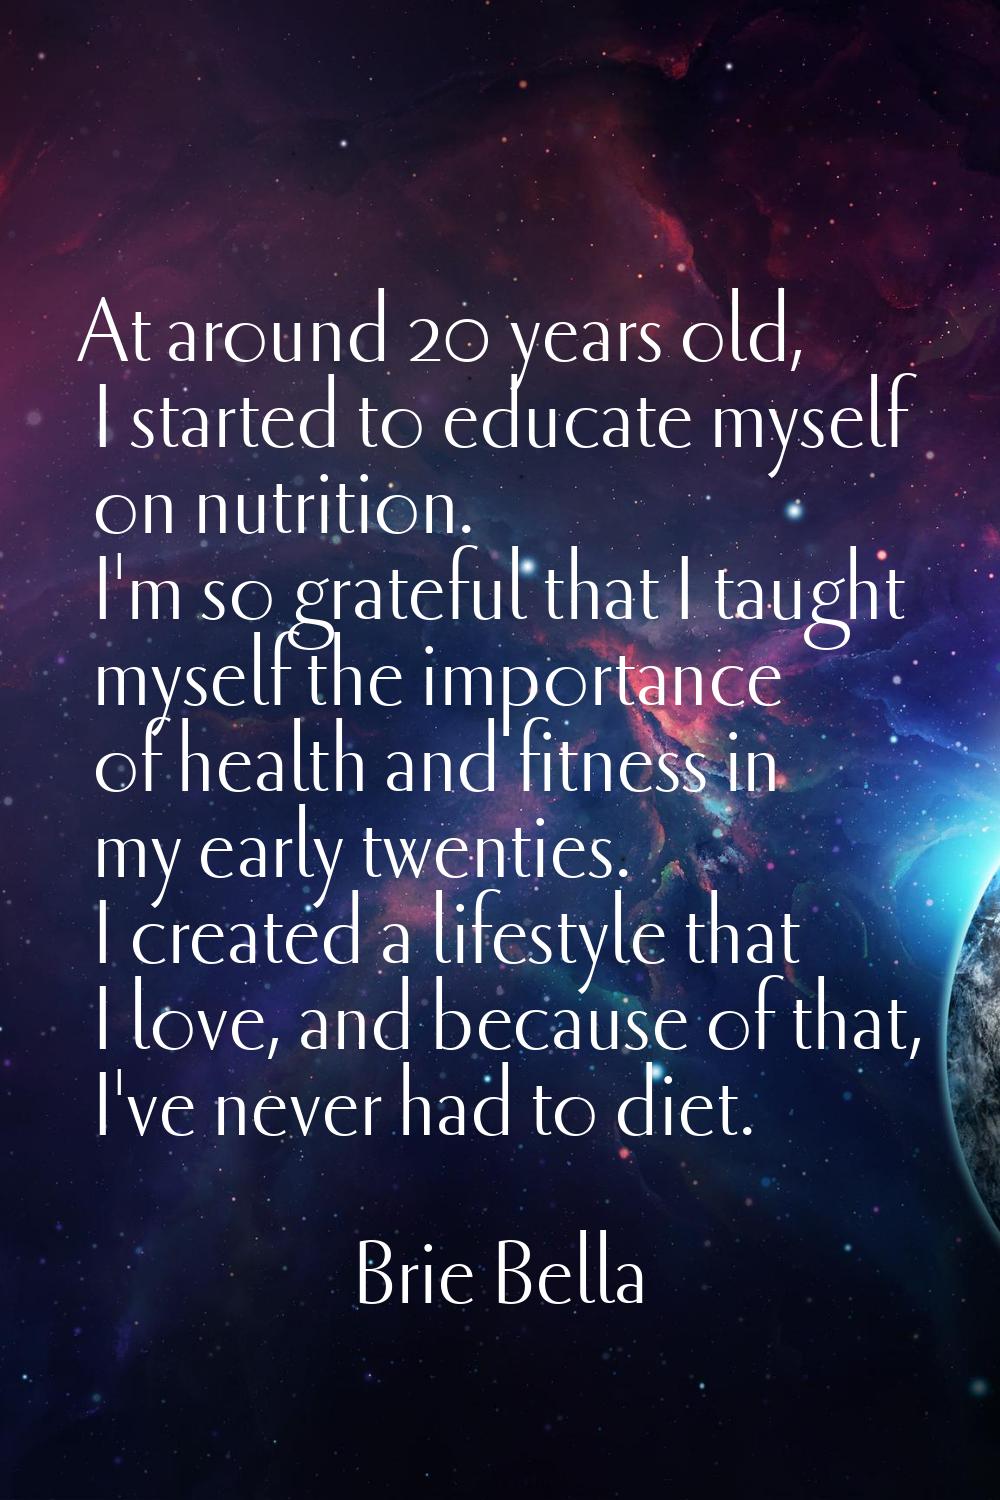 At around 20 years old, I started to educate myself on nutrition. I'm so grateful that I taught mys